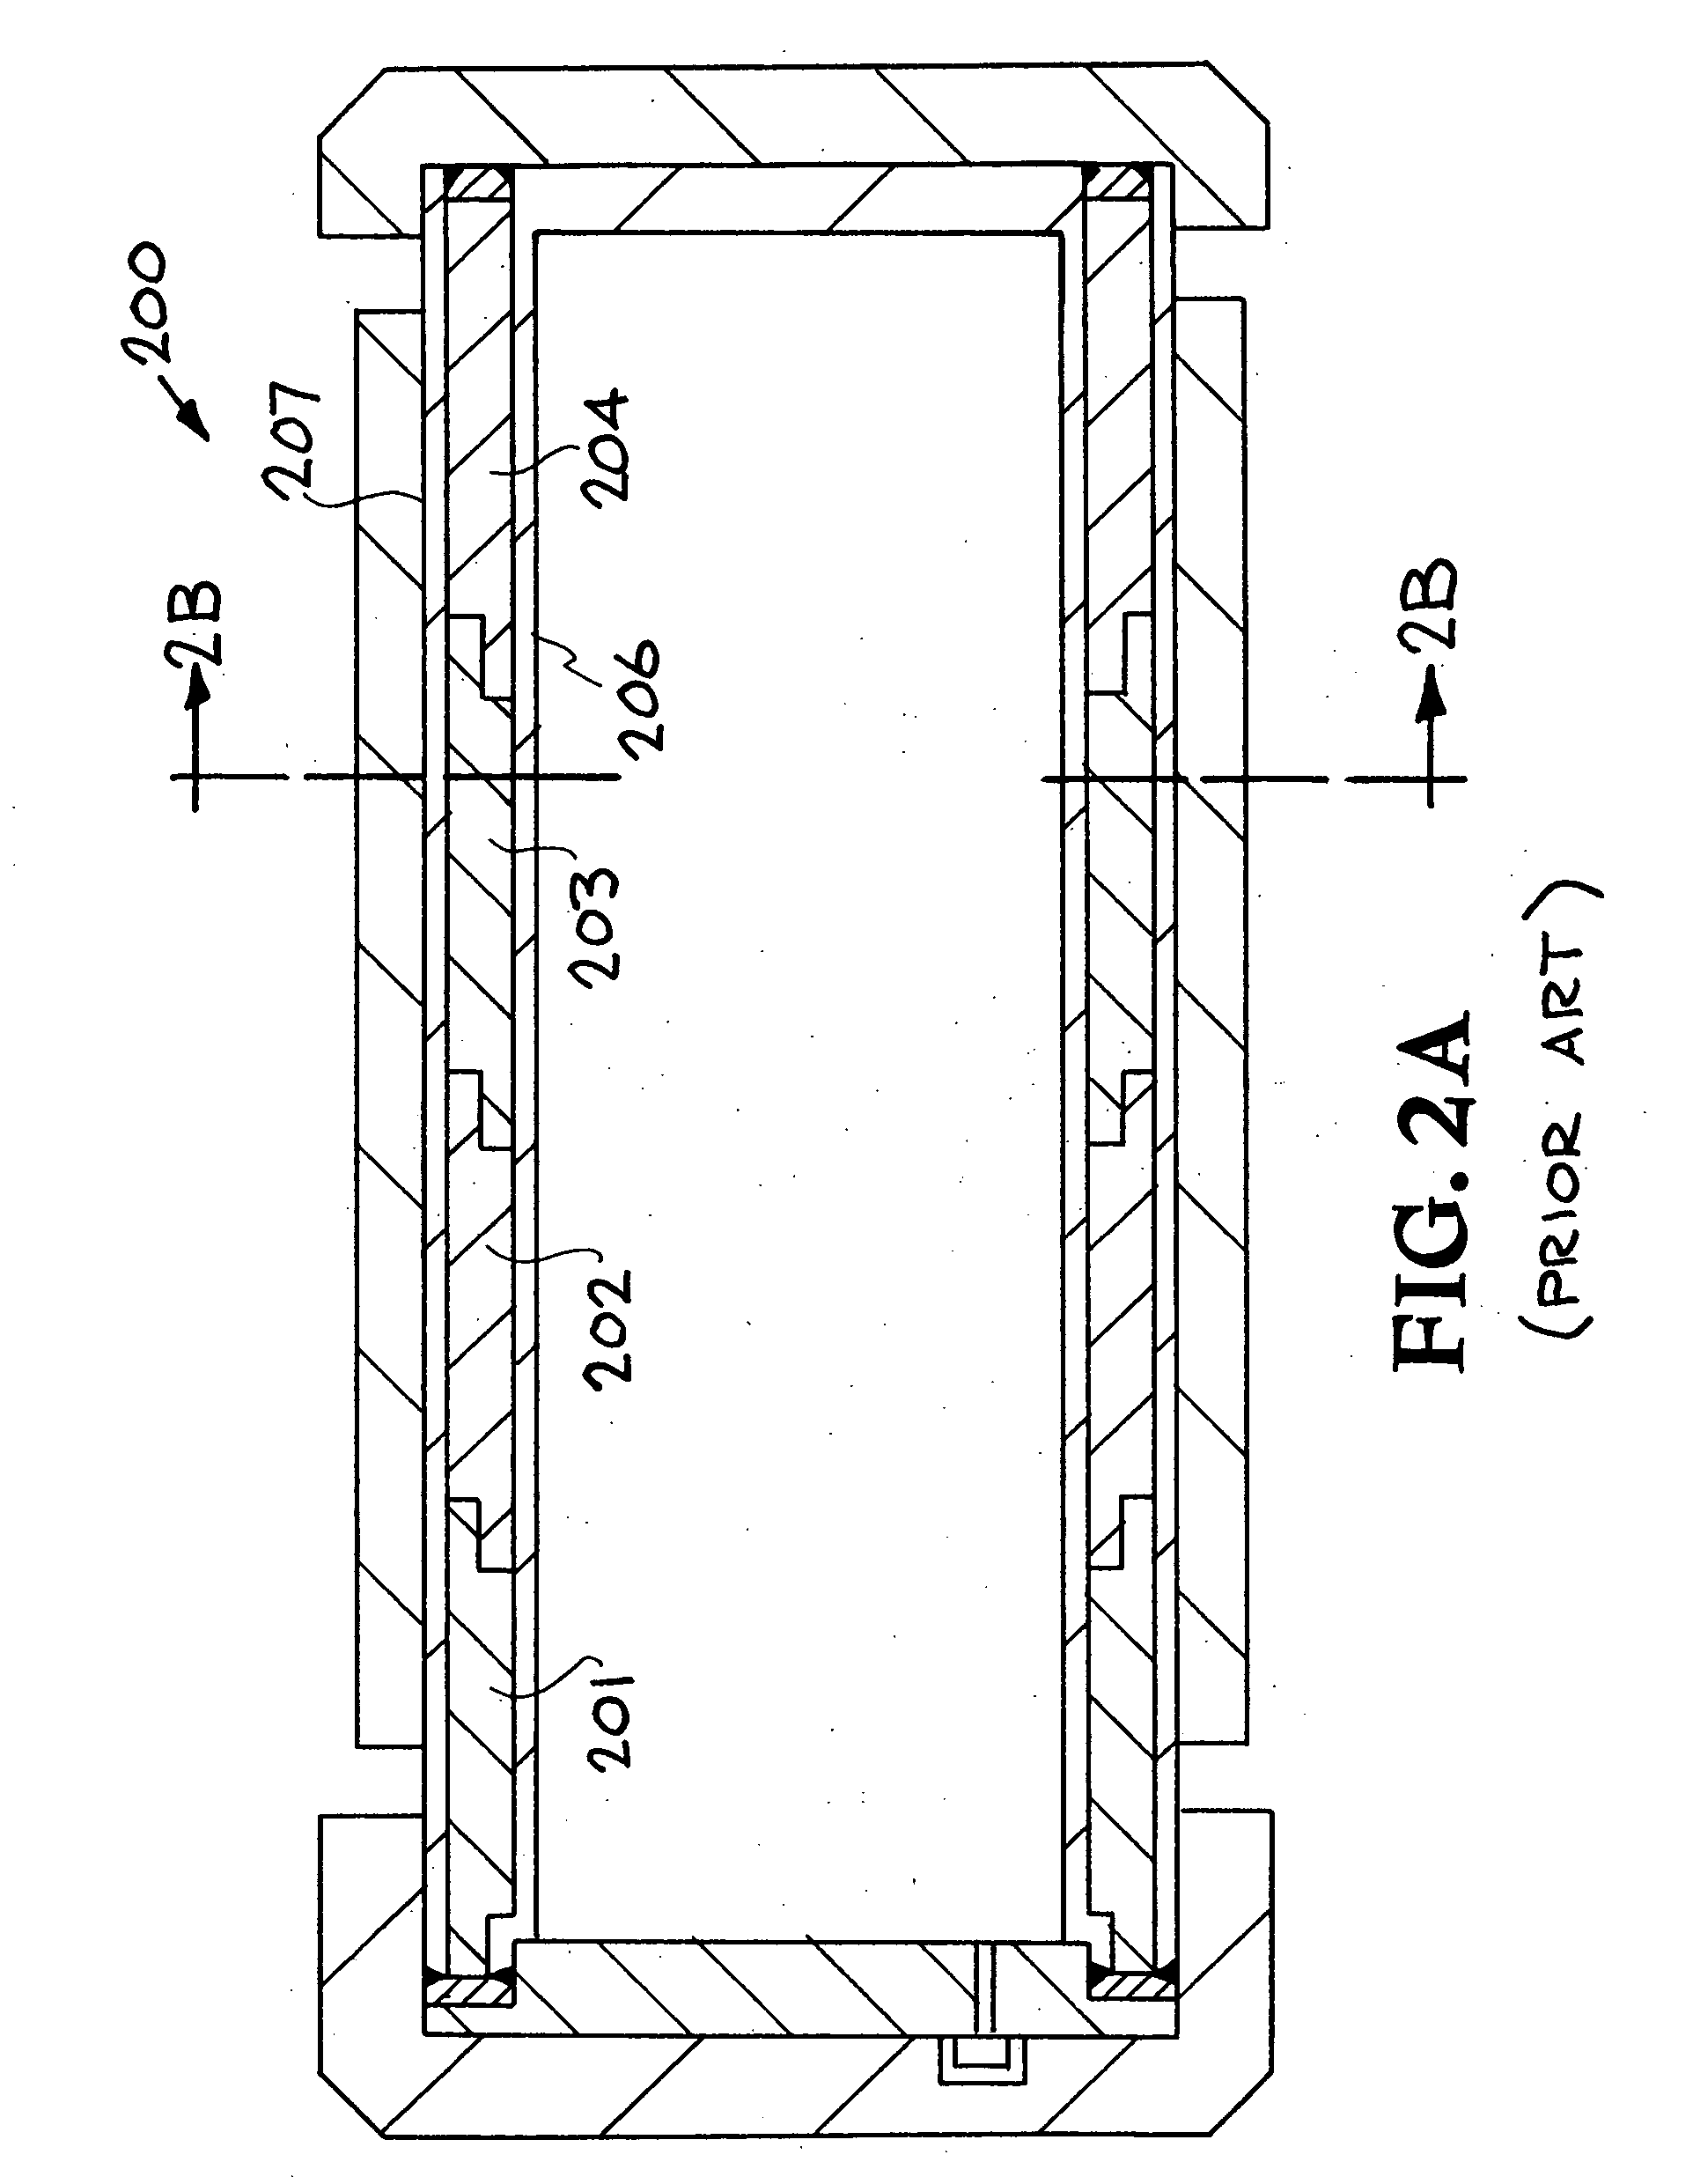 Composite-wall radiation-shielded cask and method of assembly